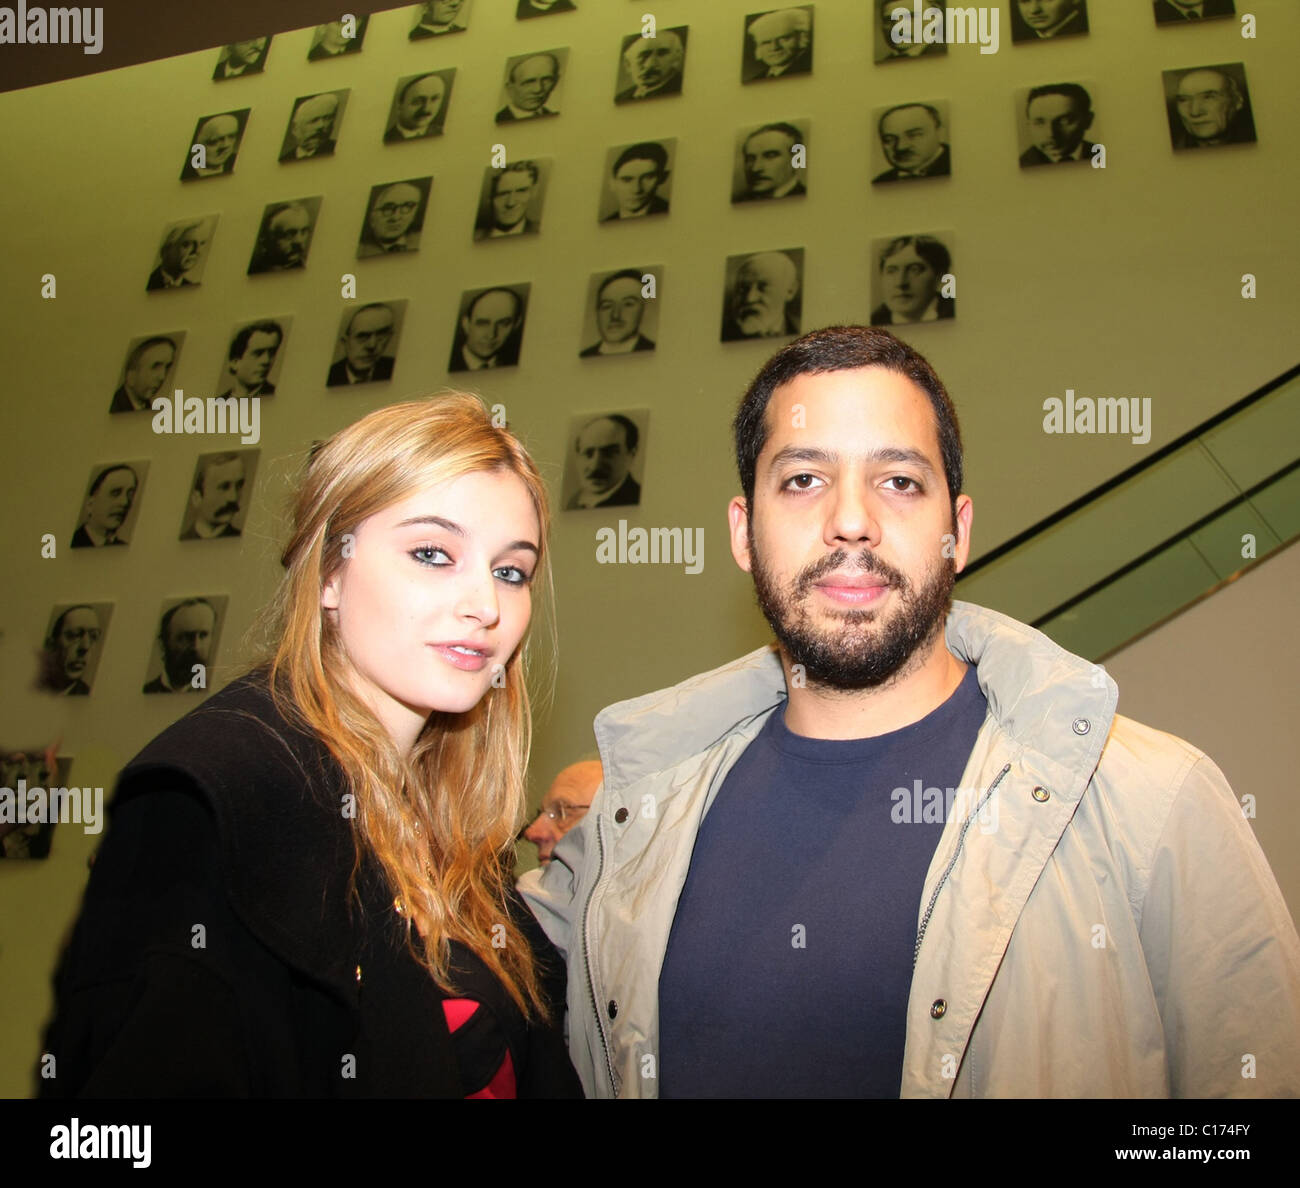 Alizee Guinochet, David Blaine attend the Gerhard Ritcher private view held at the National Portrait Gallery London, England - Stock Photo